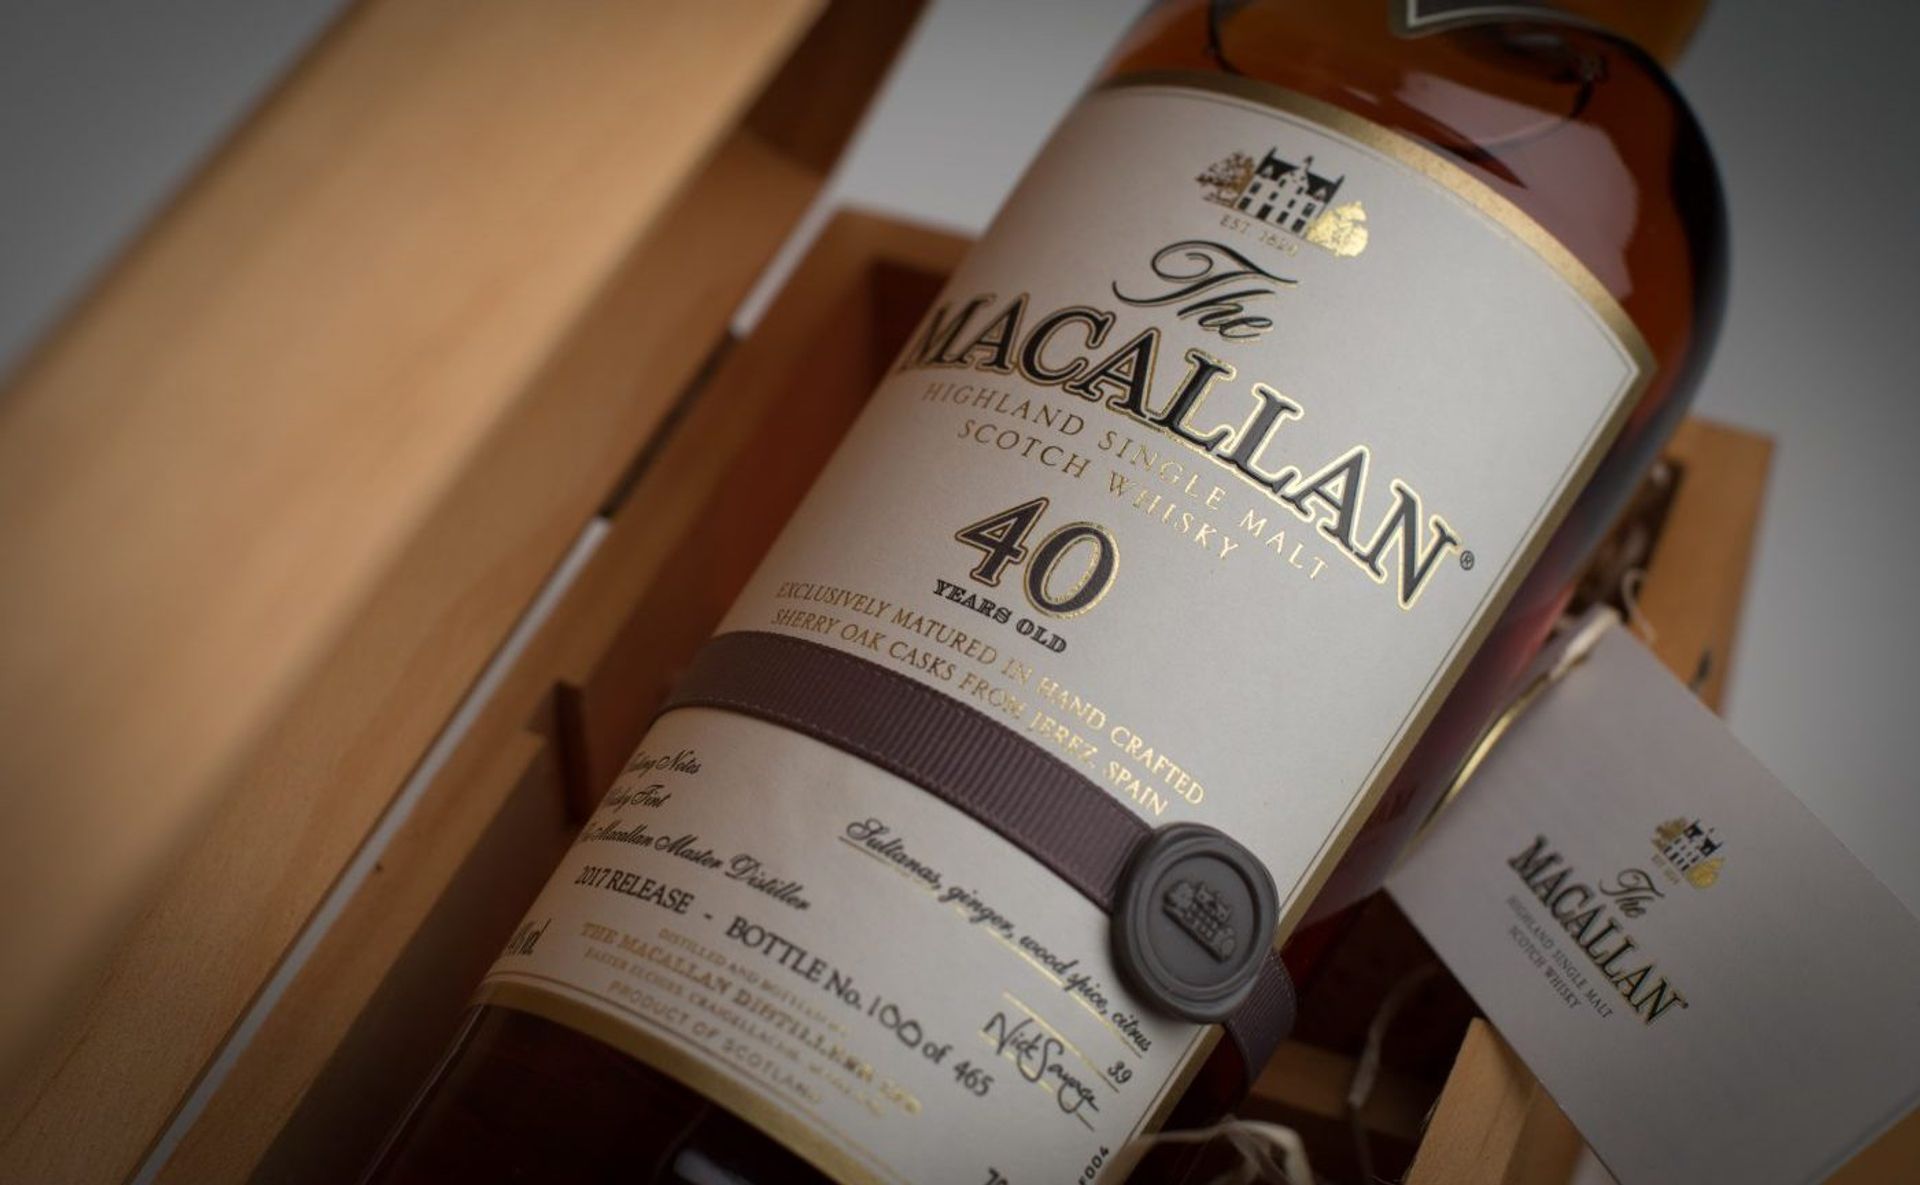 The macallan 40 year old